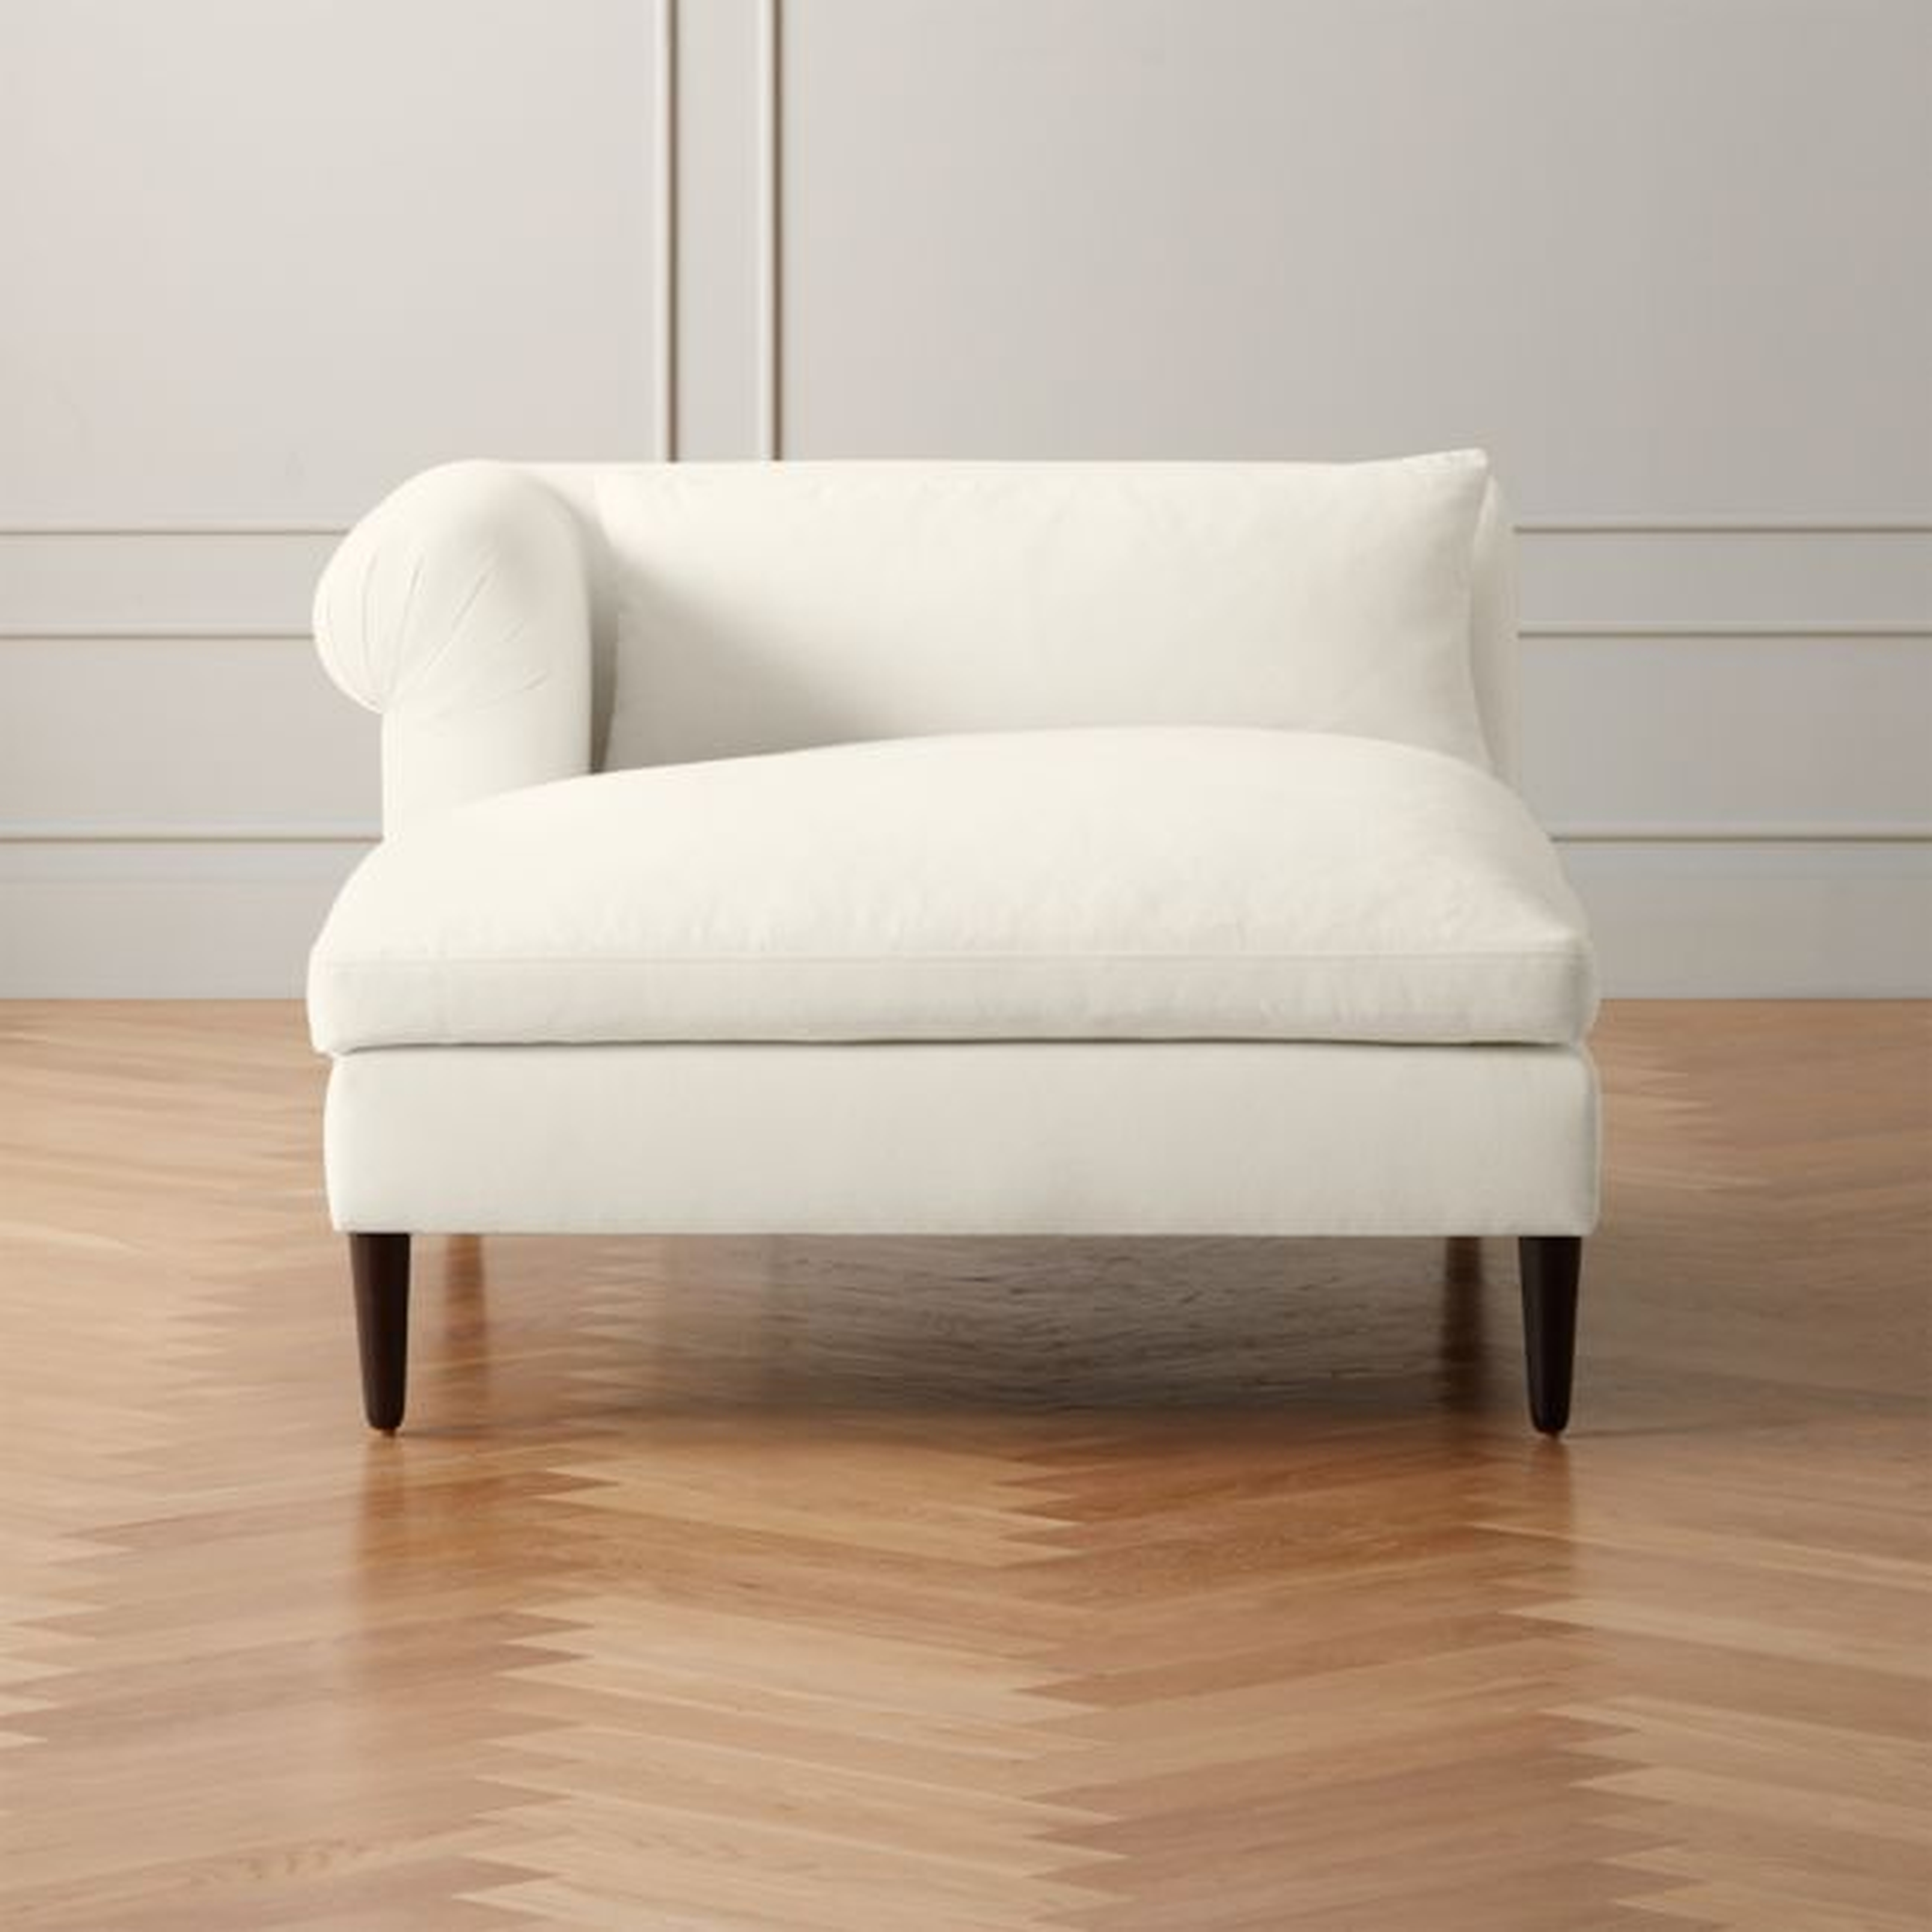 York Frost Left Arm Wide Chaise Lounge - CB2